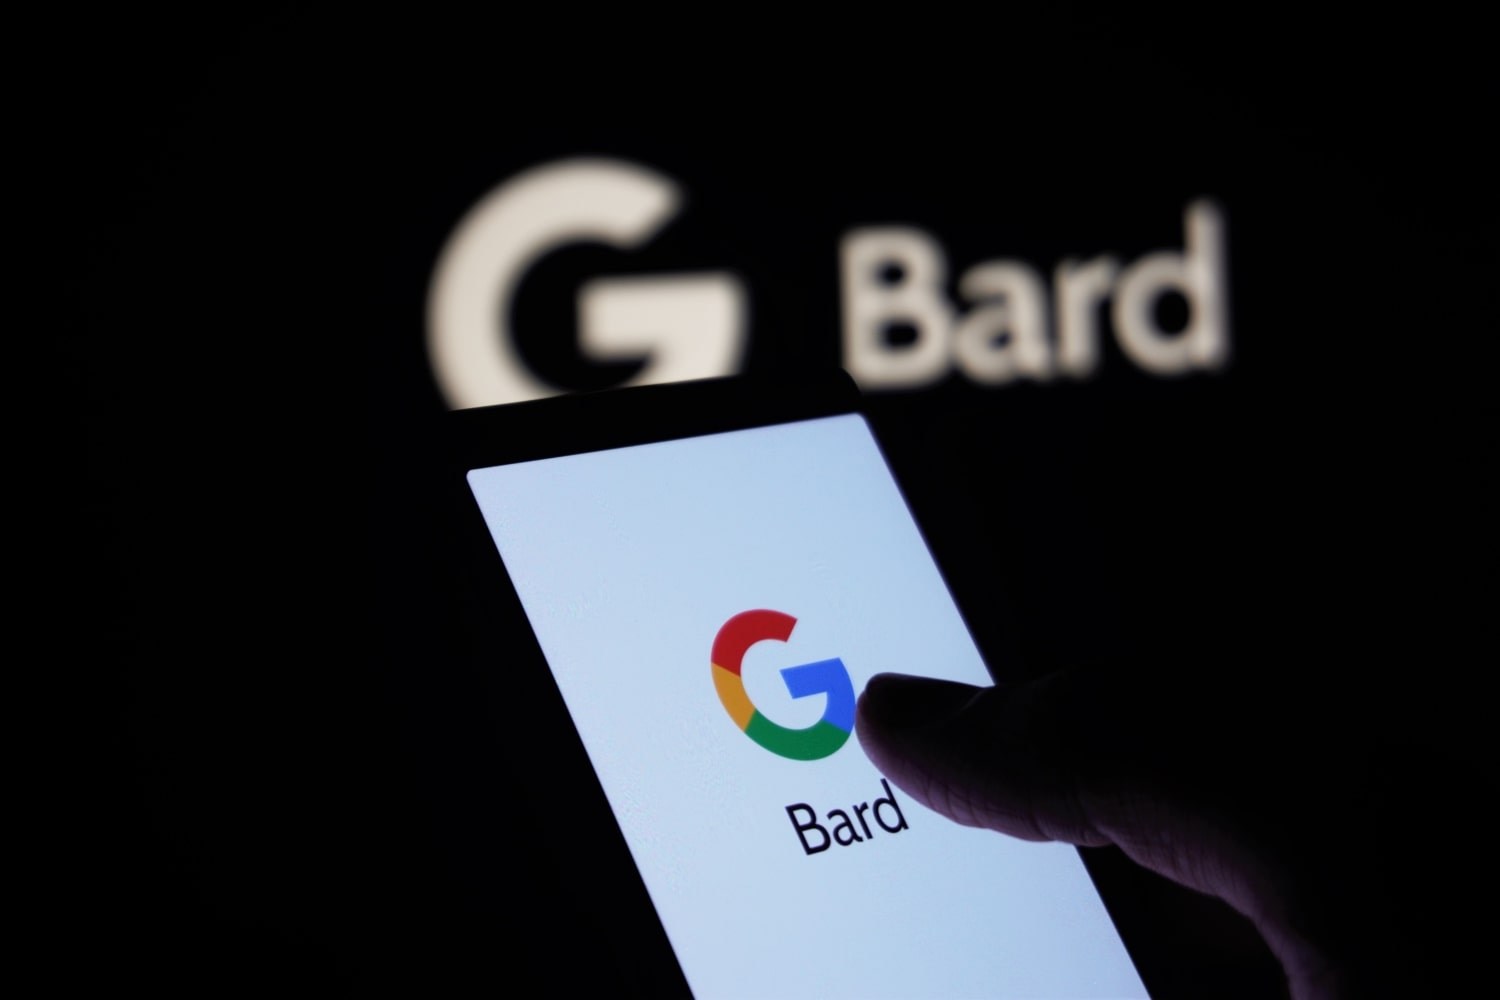 A person holds a phone with the Google logo and word 'Bard' on the screen. In the background is a Google Bard logo.